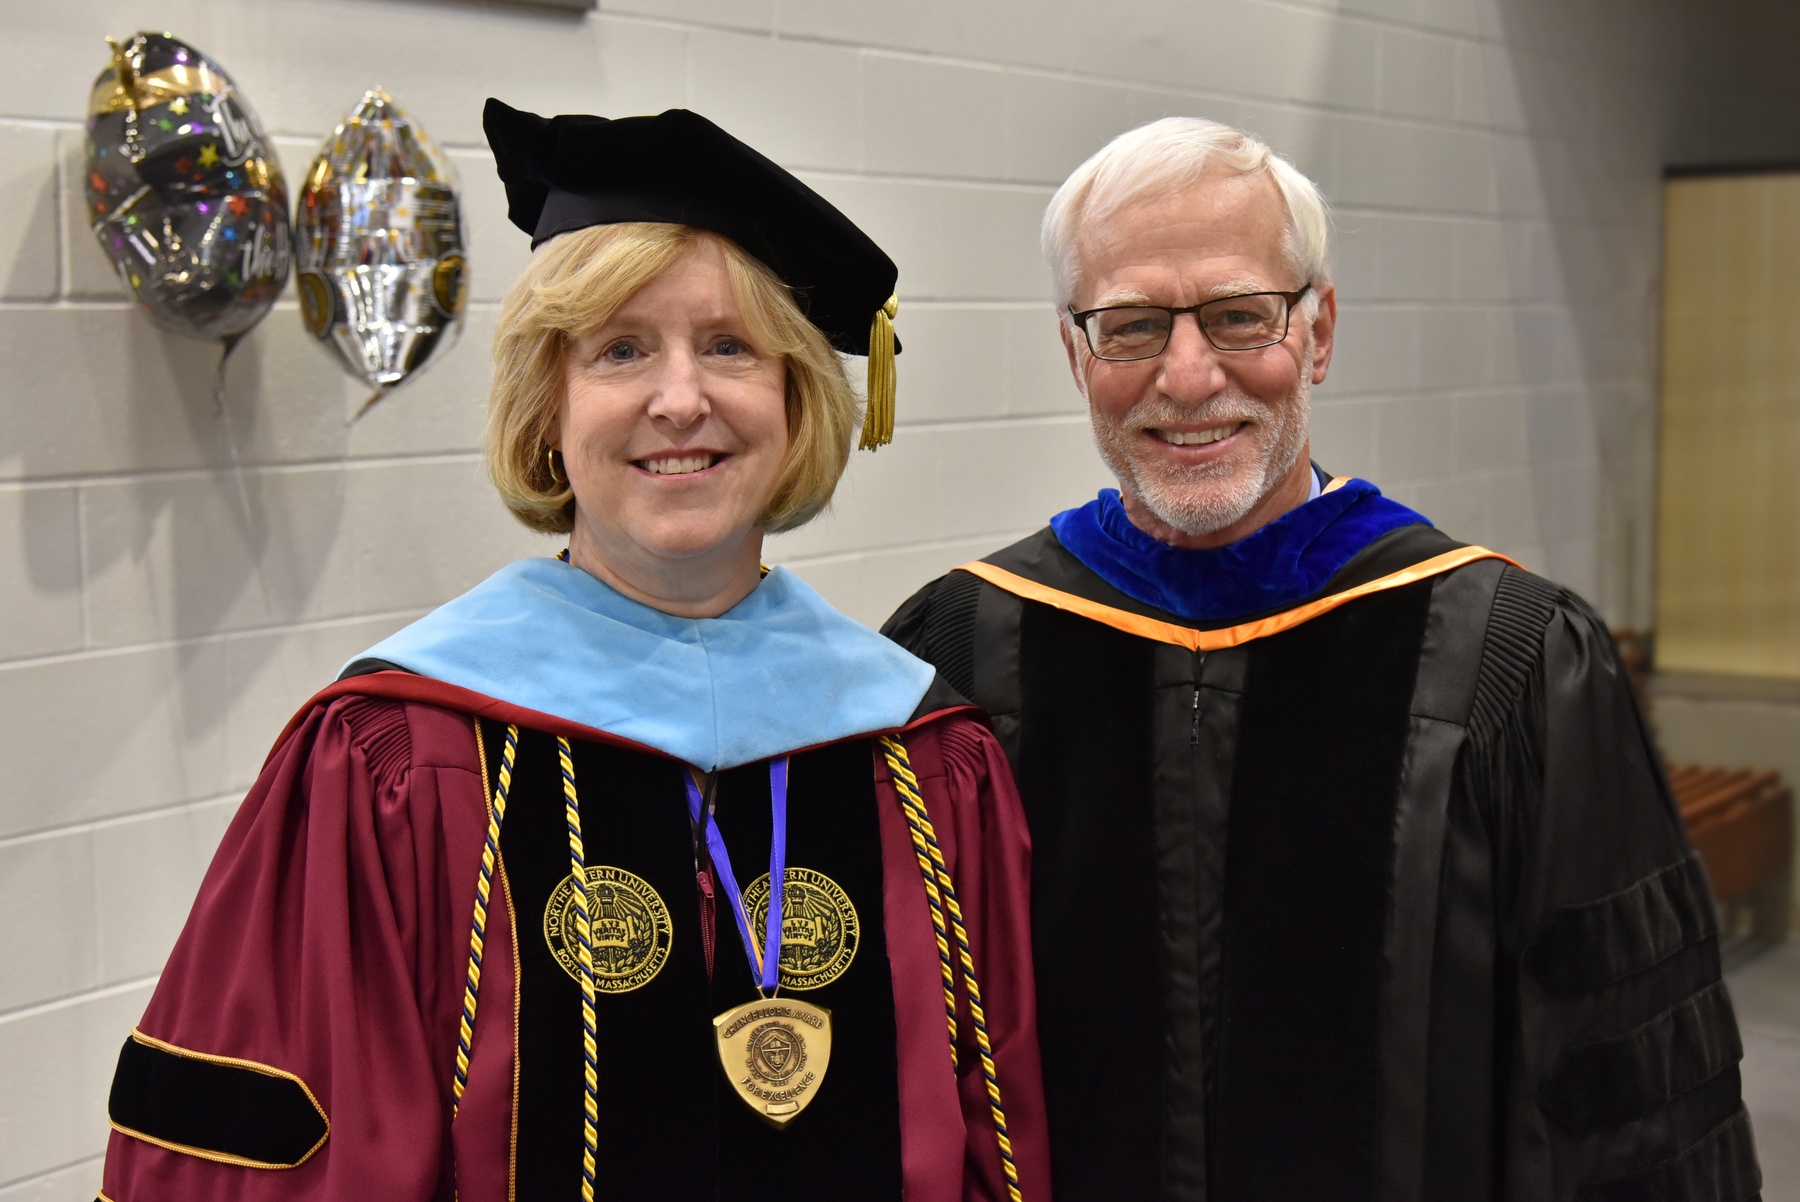 Retiring faculty staff are recognized at Commencement. Pictured during the 9 a.m. ceremony are Kathleen Evans, assistant vice president for academic support, and Jerry Oberst, senior associate director of admissions.